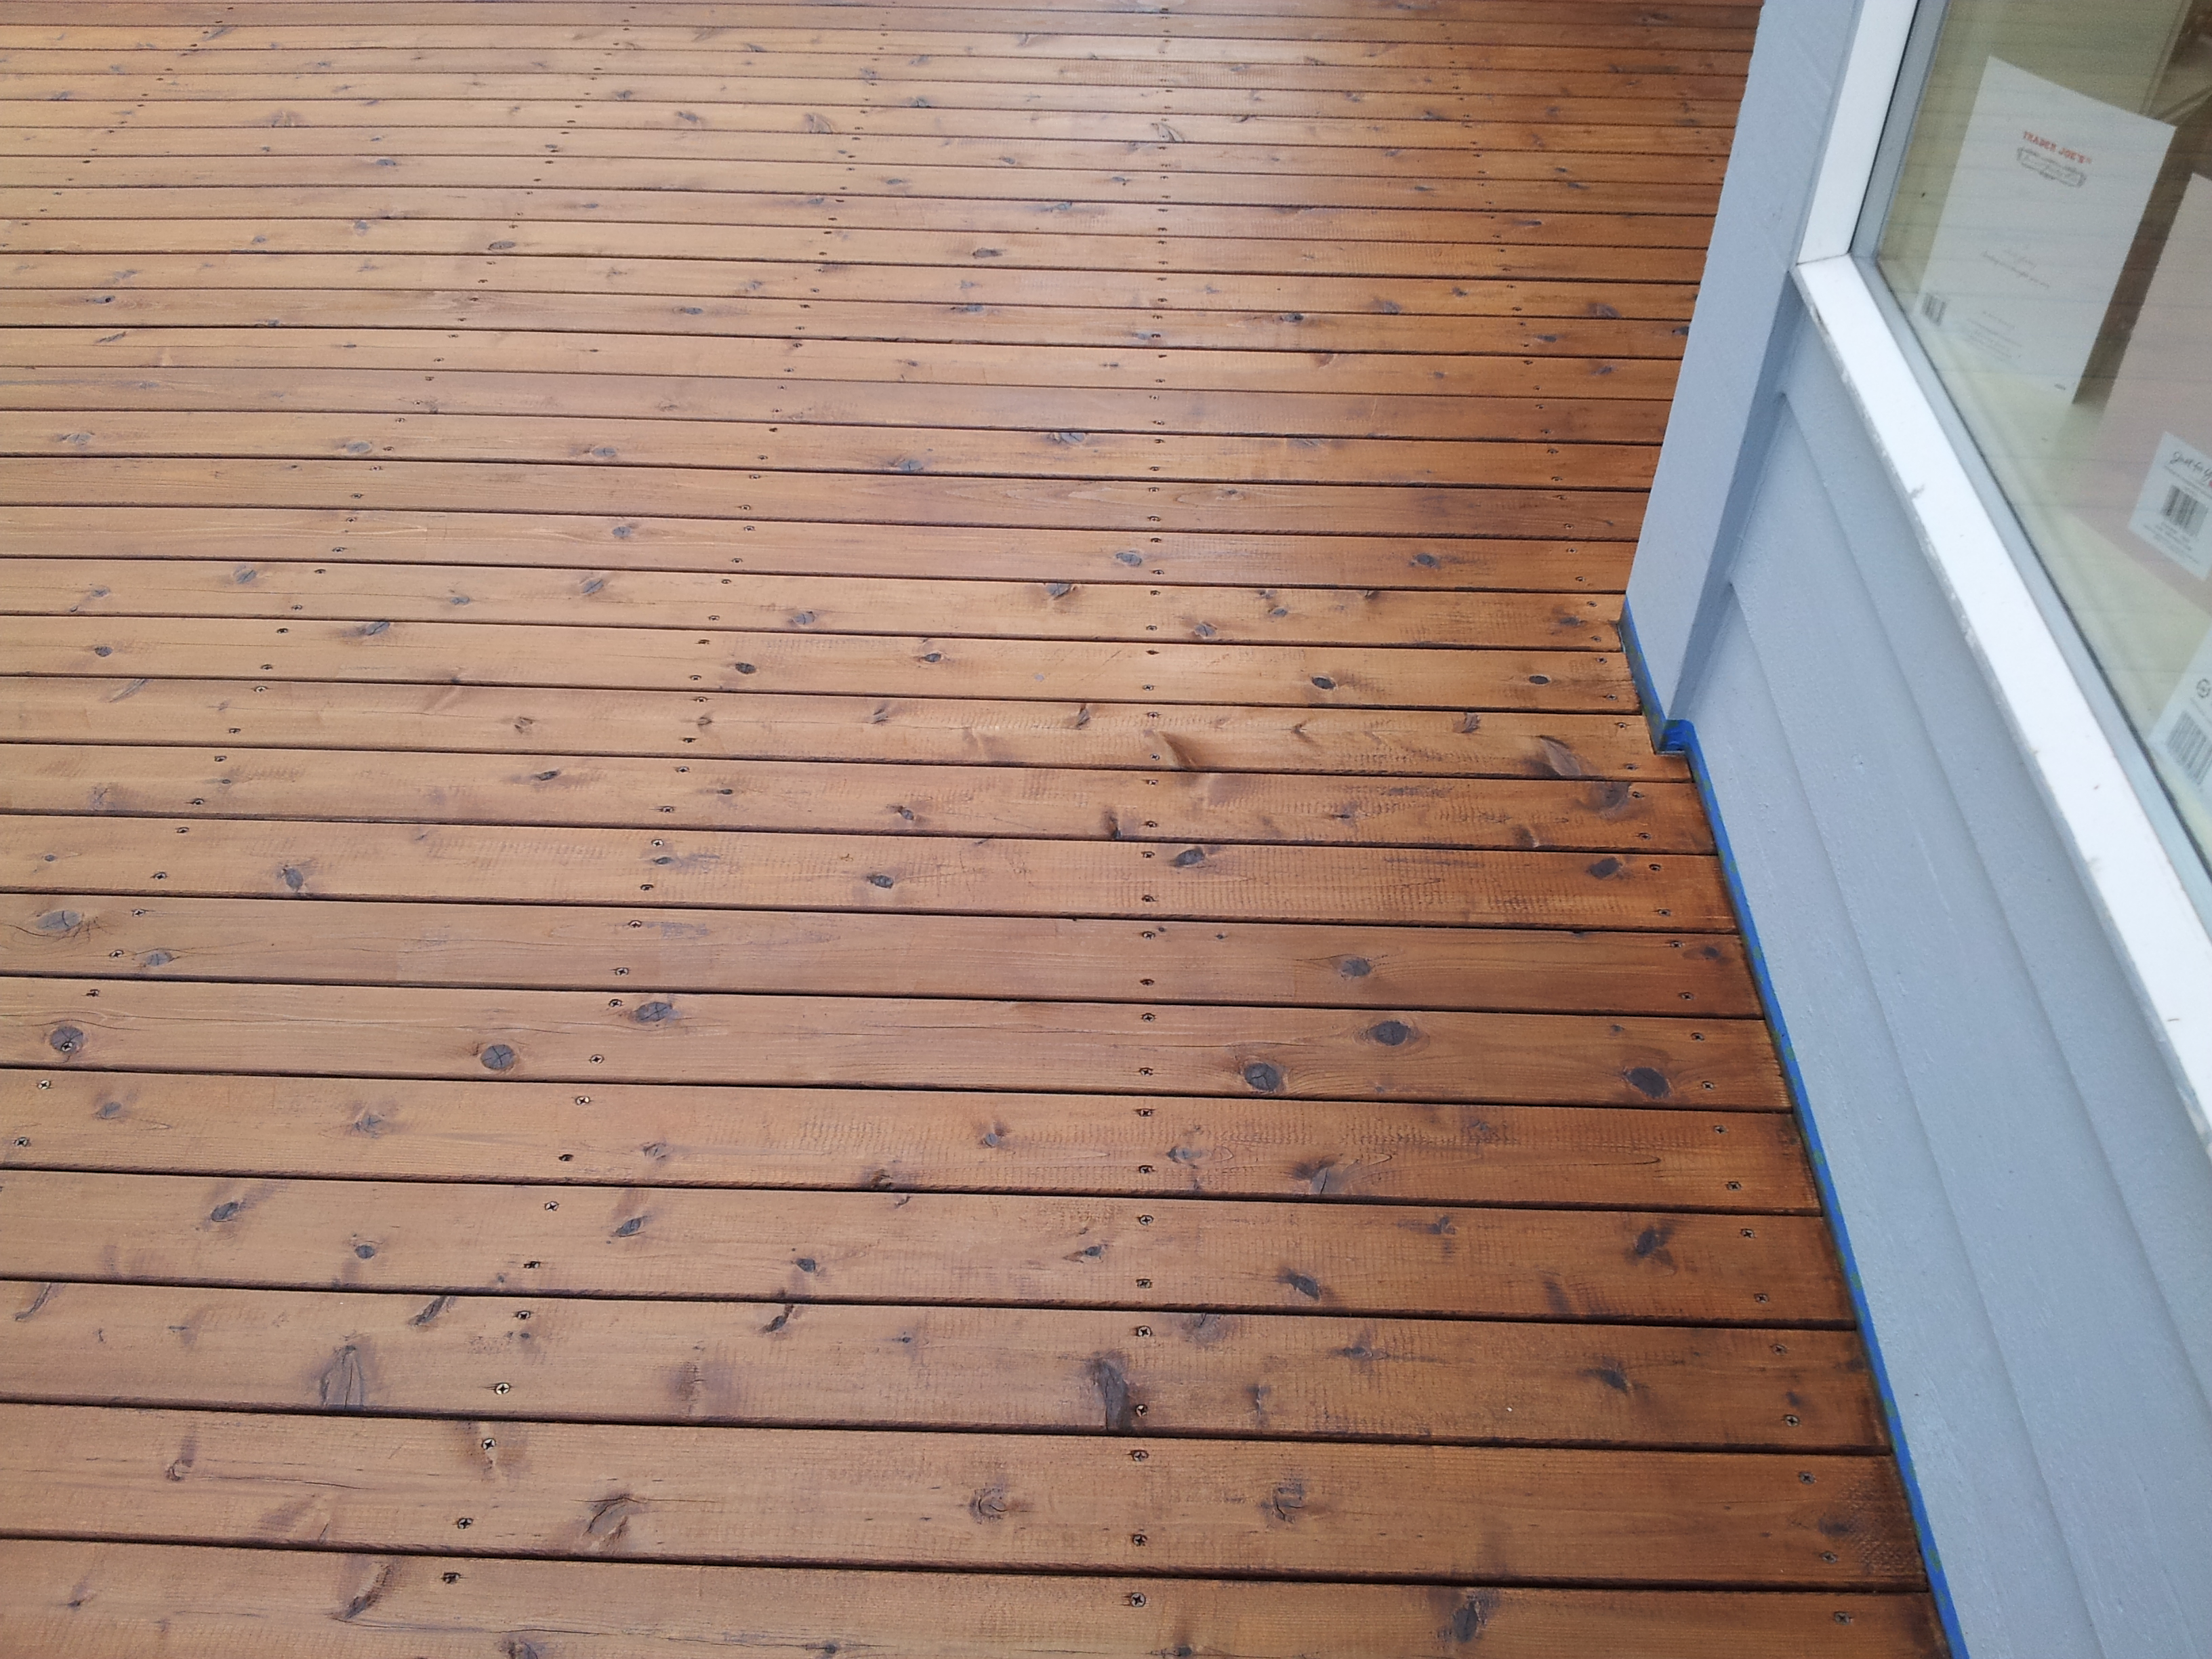 Oil Based Deck Stains 2018 Best Deck Stain Reviews Ratings intended for size 3264 X 2448